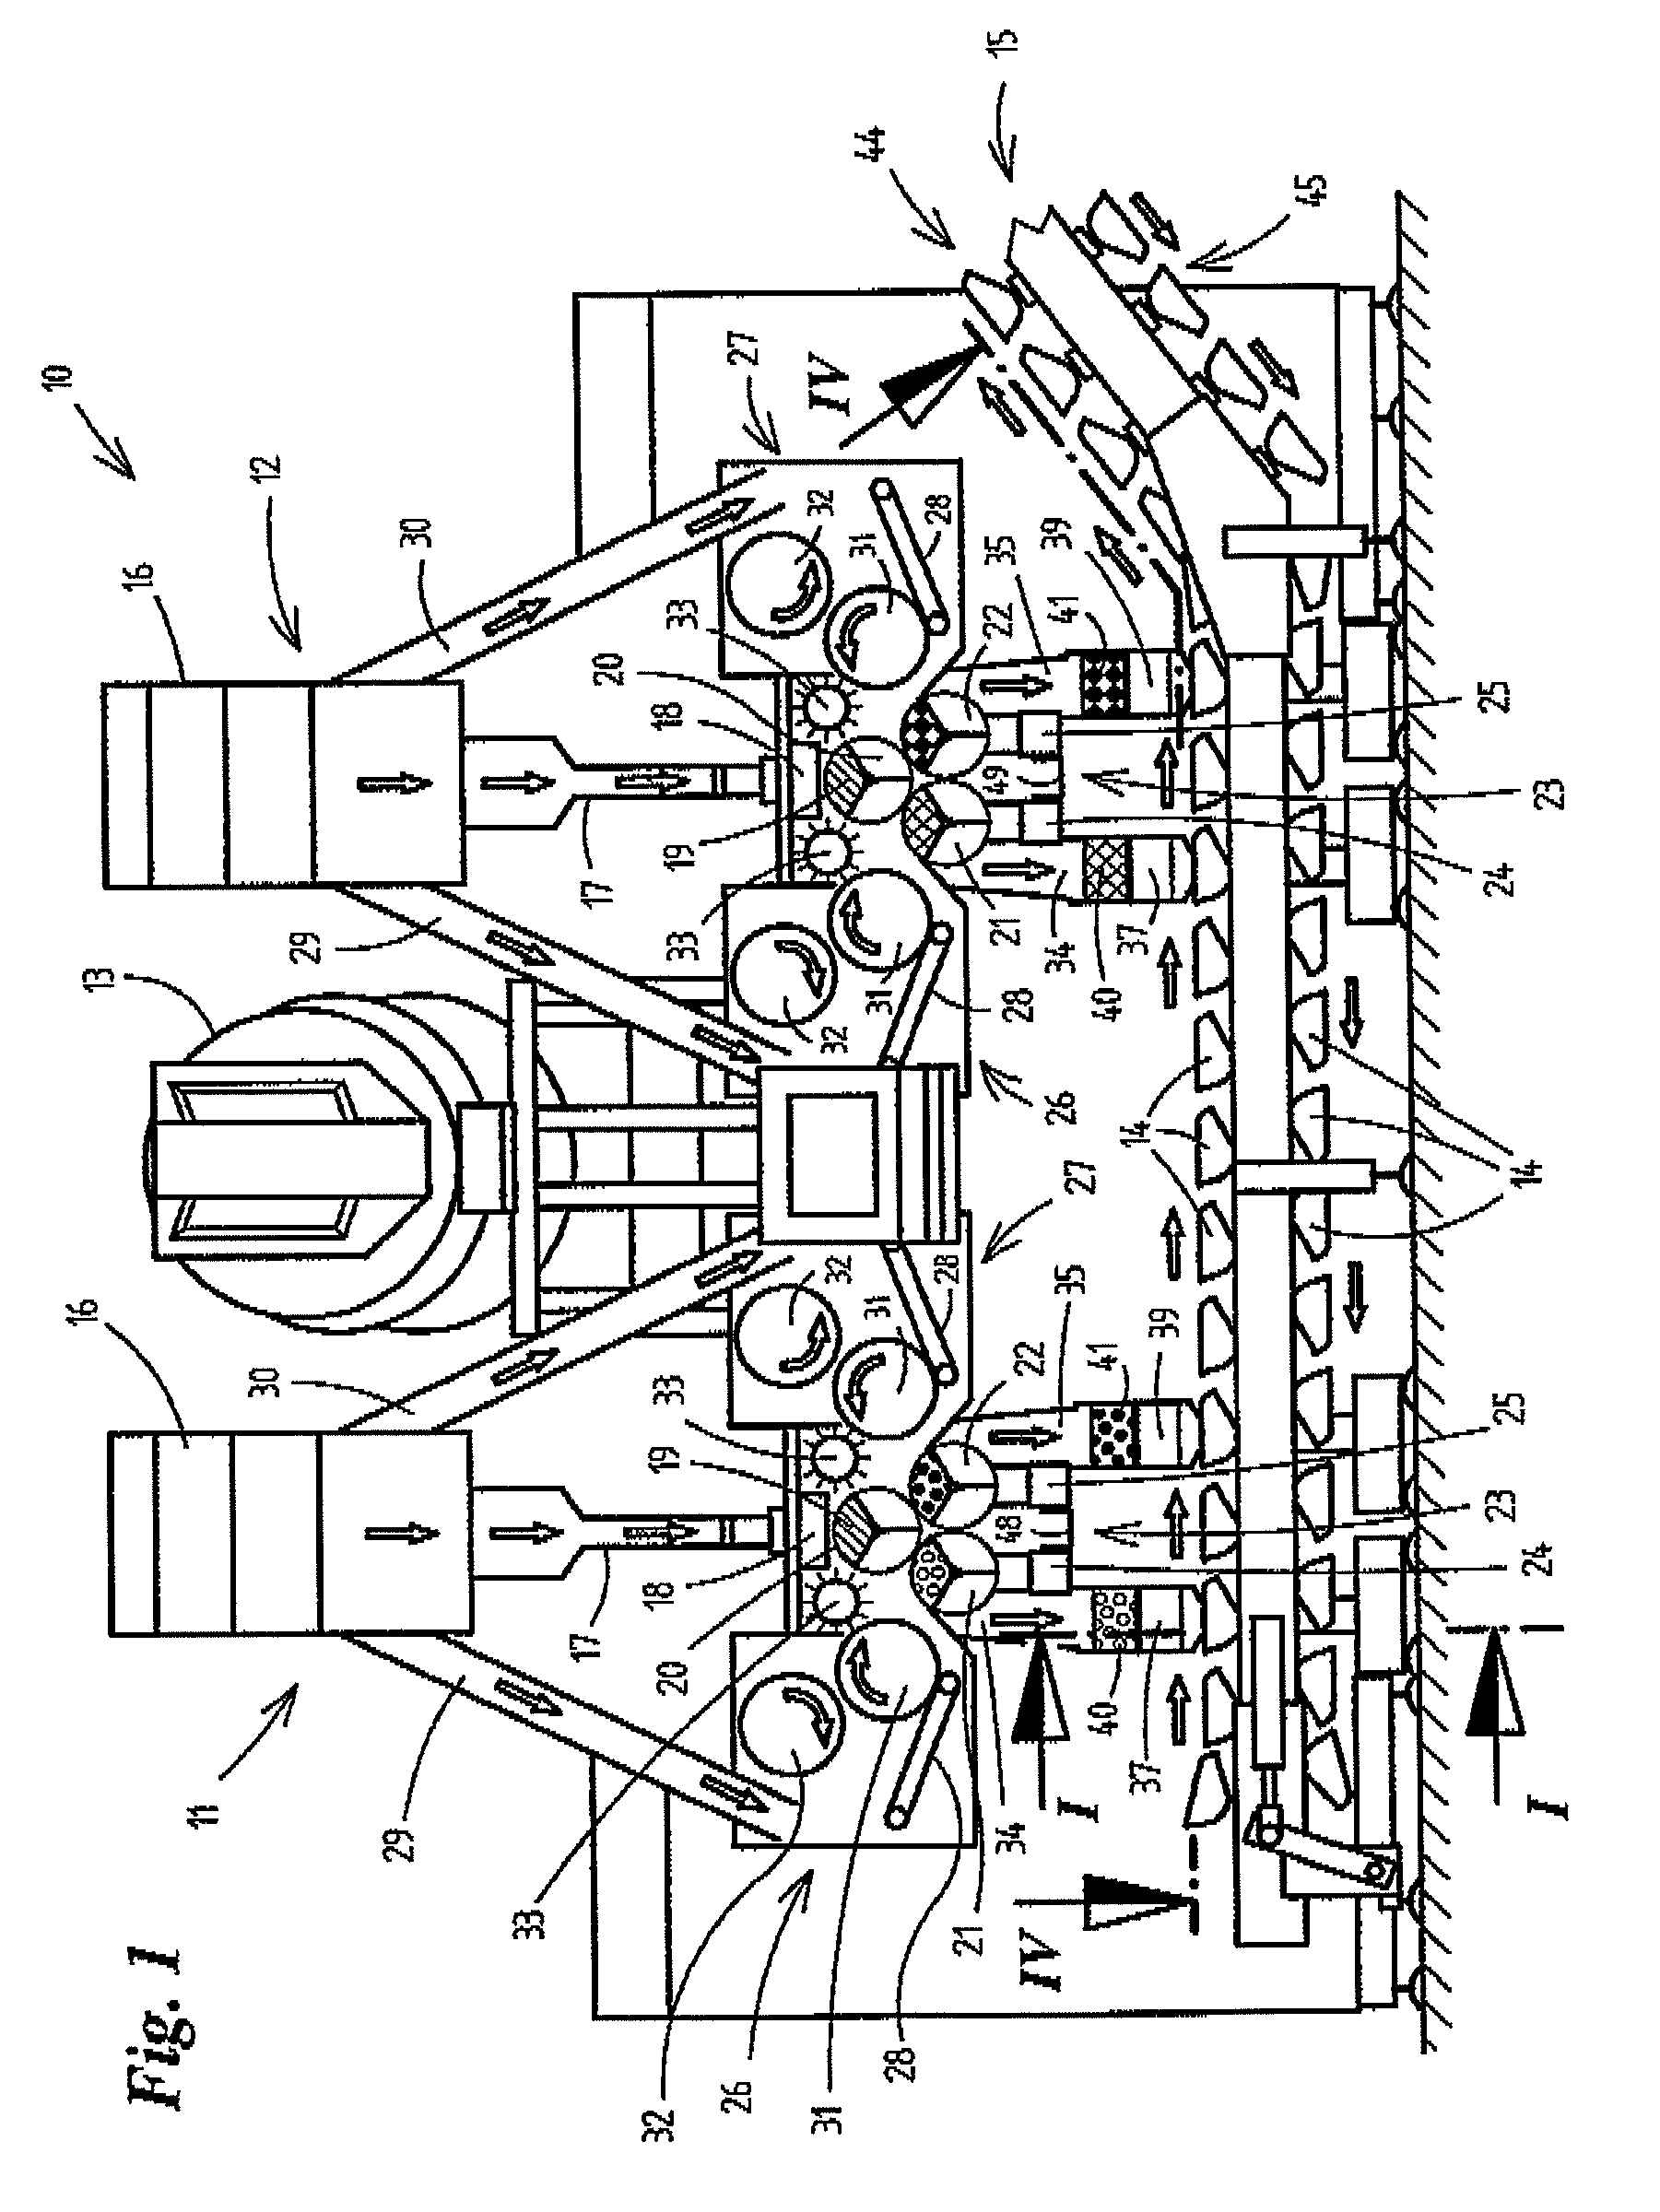 Method and apparatus for forming portions of fibrous material